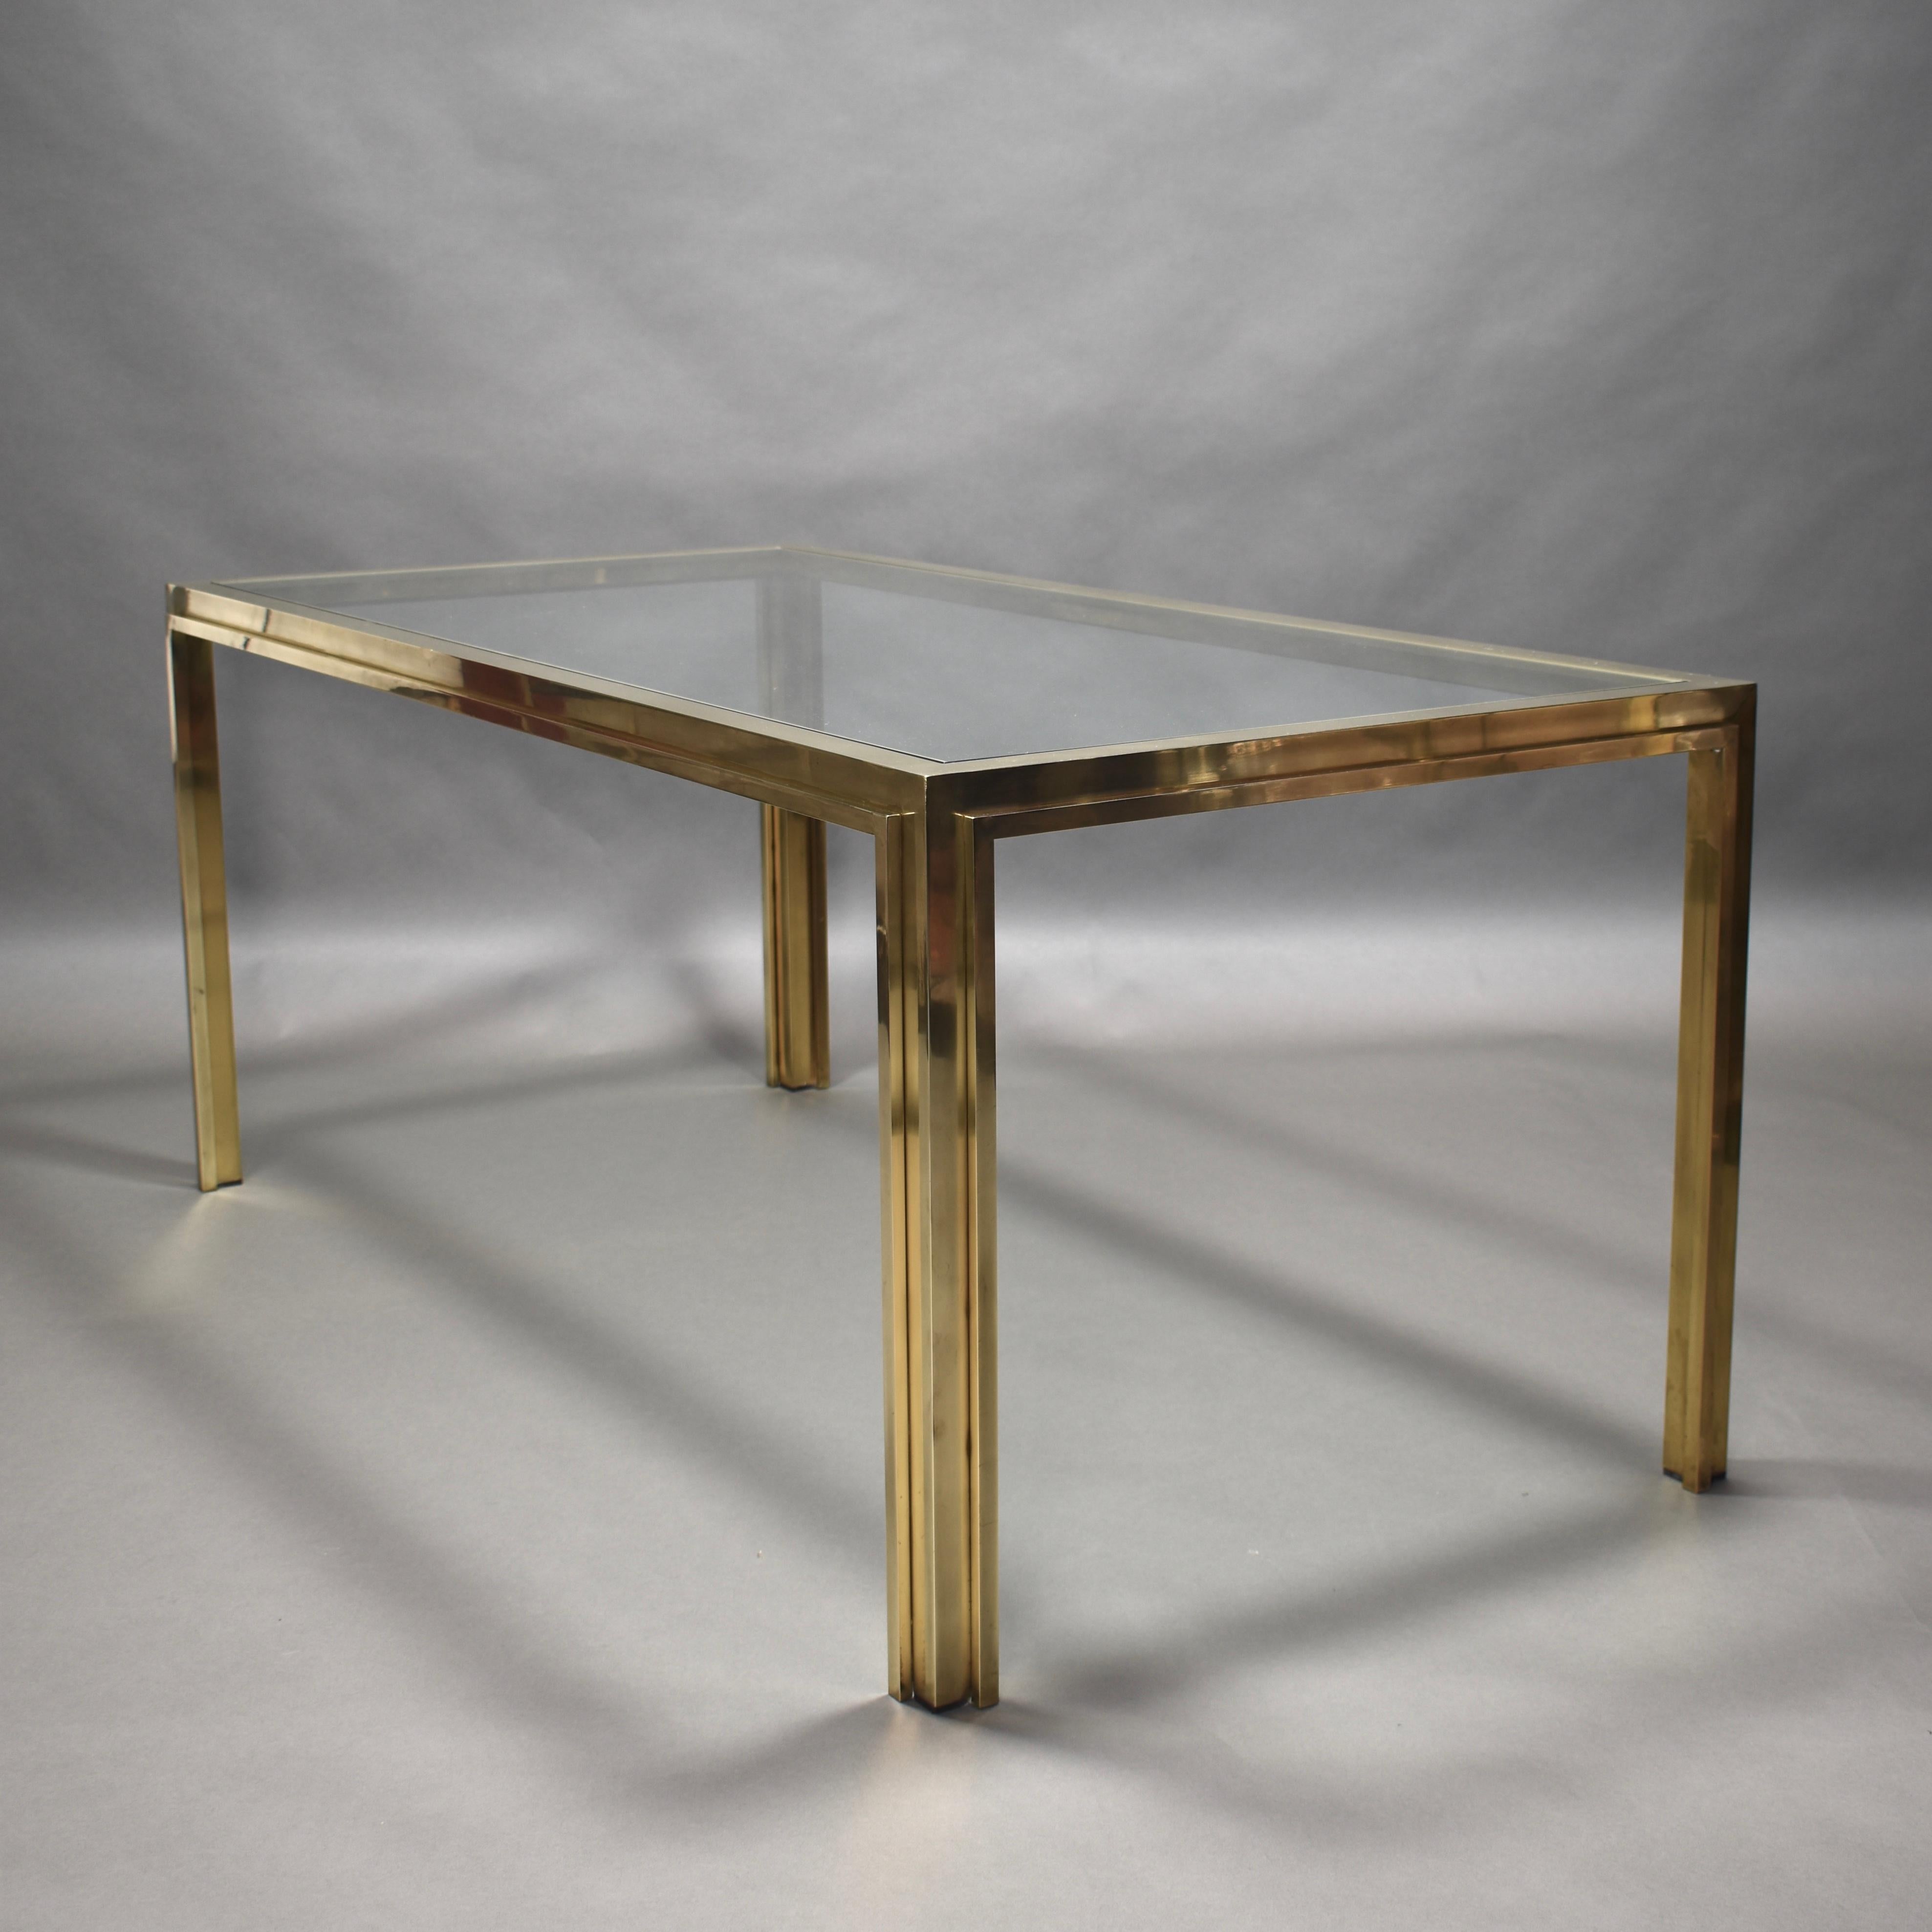 Gorgeous dining table in brass and clear glass, Italy, 1970s.
Amazing, minimalistic and clean design features.
! This listing is for just the table and not the chairs ! Chairs are available for sale.

The table is made of solid brass and clear glass